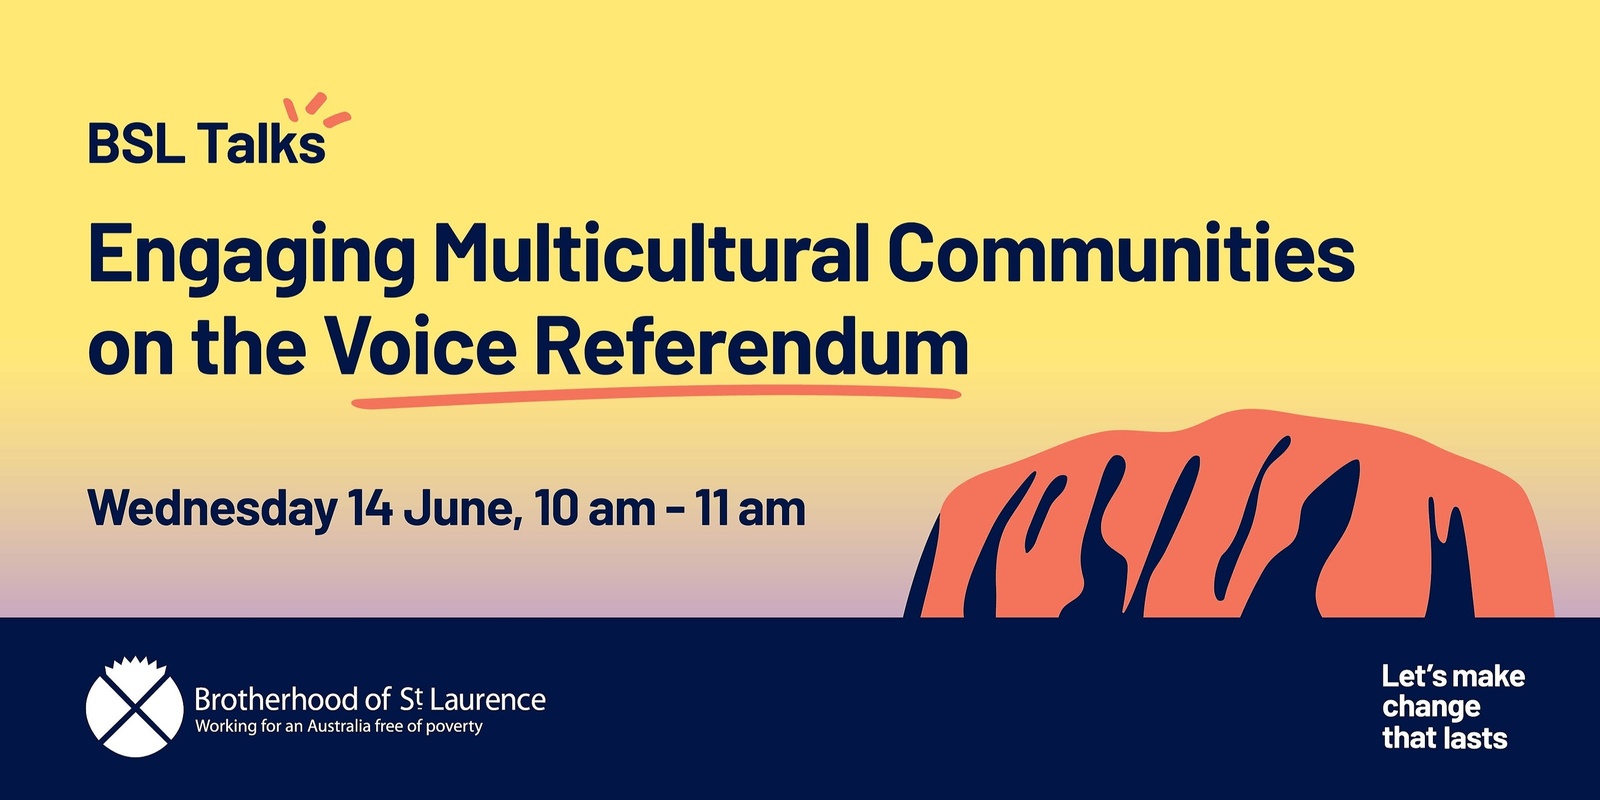 BSL Talks - Engaging Multicultural Communities on the Voice Referendum